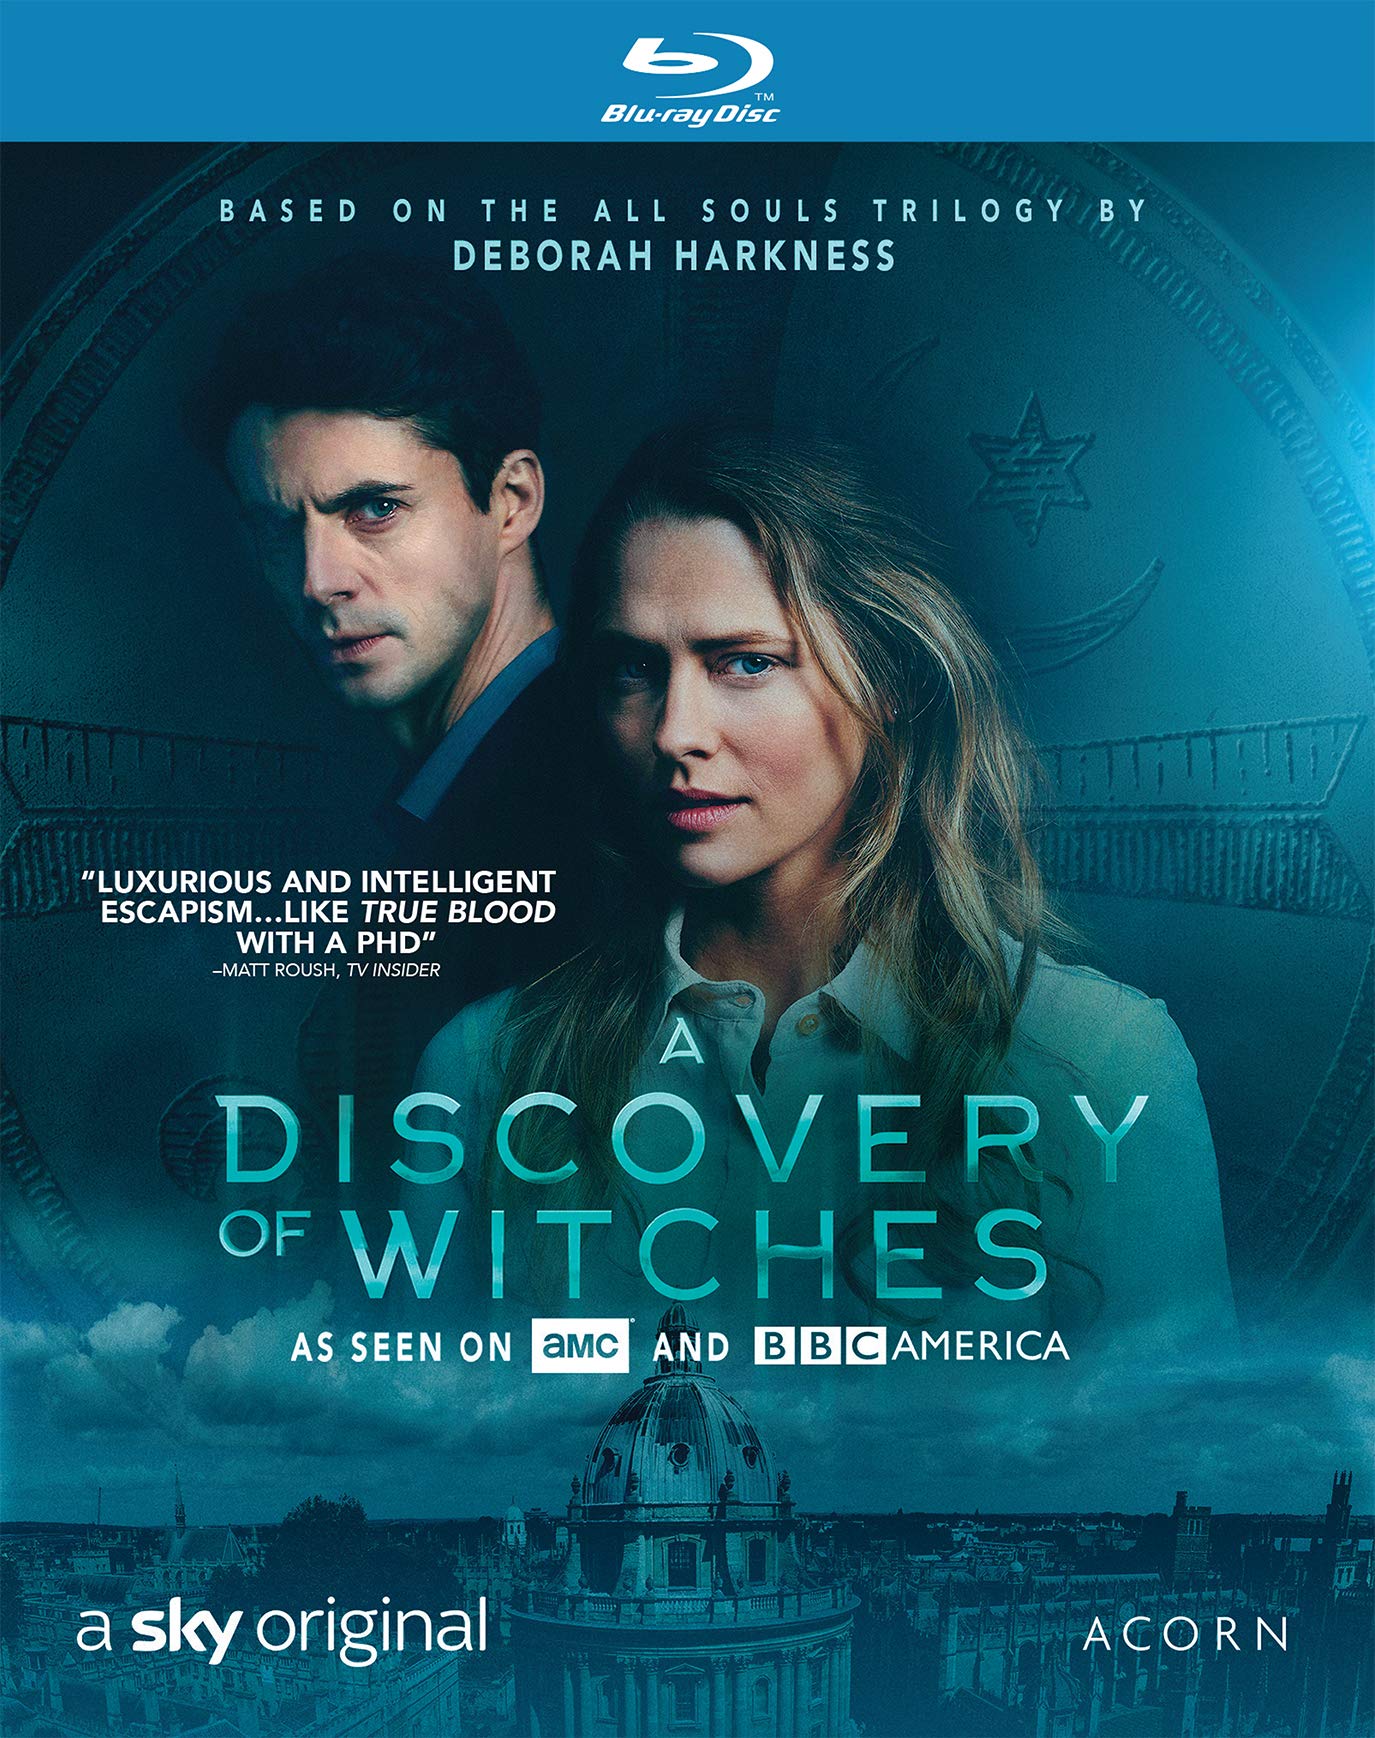 A Discovery of Witches [Blu-ray] on MovieShack